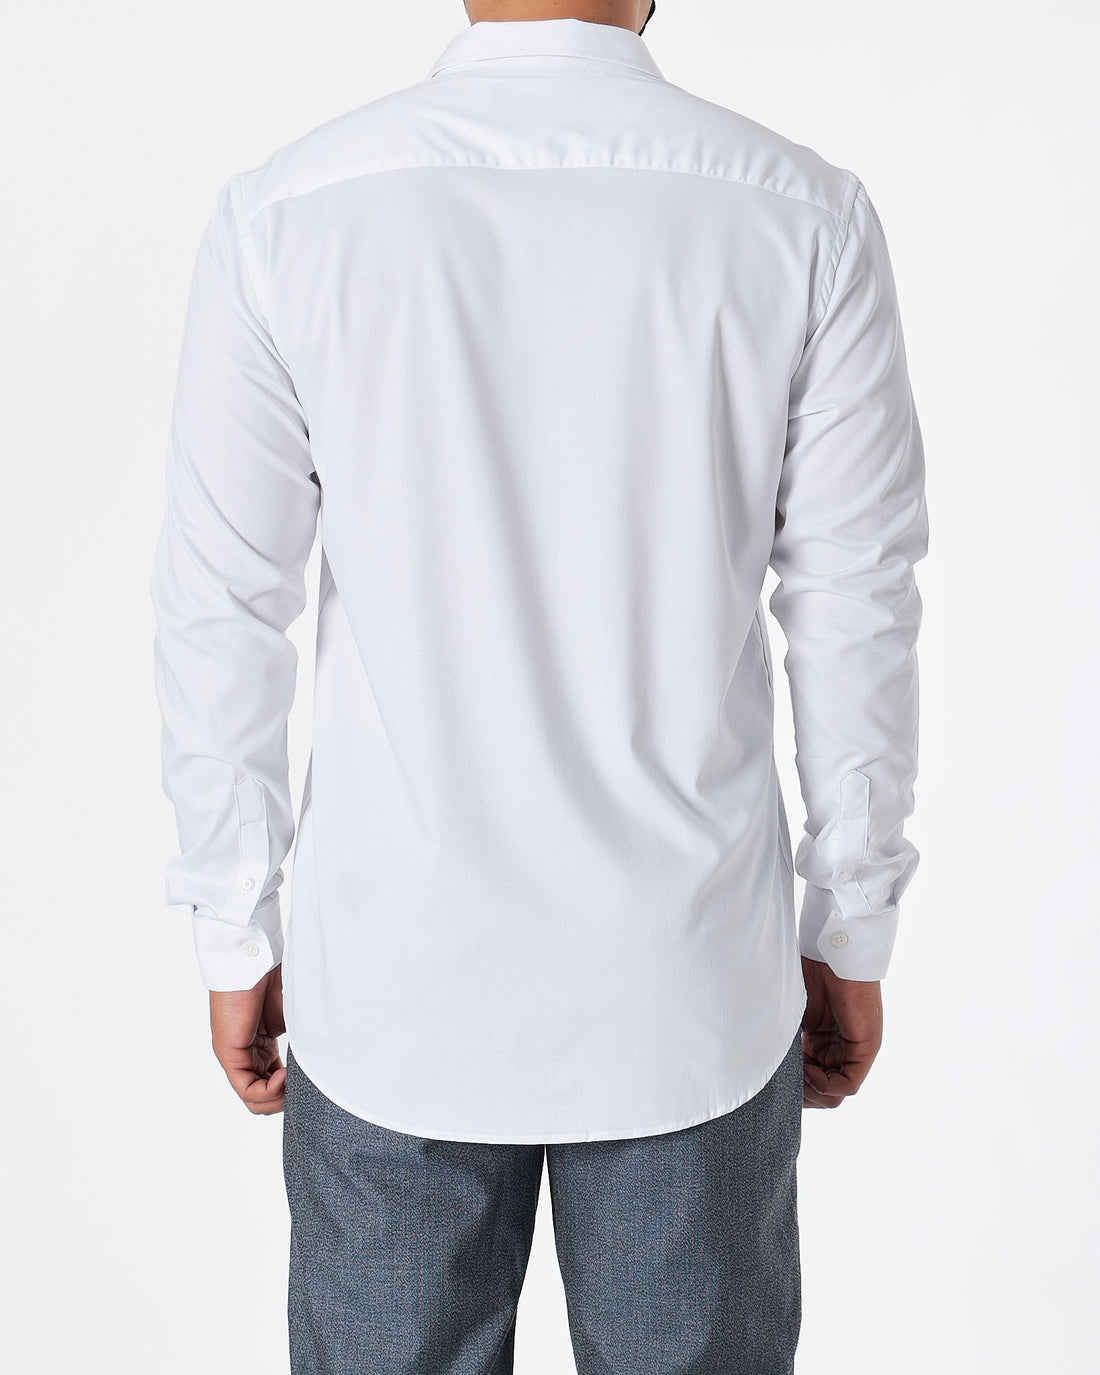 MOI OUTFIT-ABA Slim Fit Men White Shirts Long Sleeve 17.90